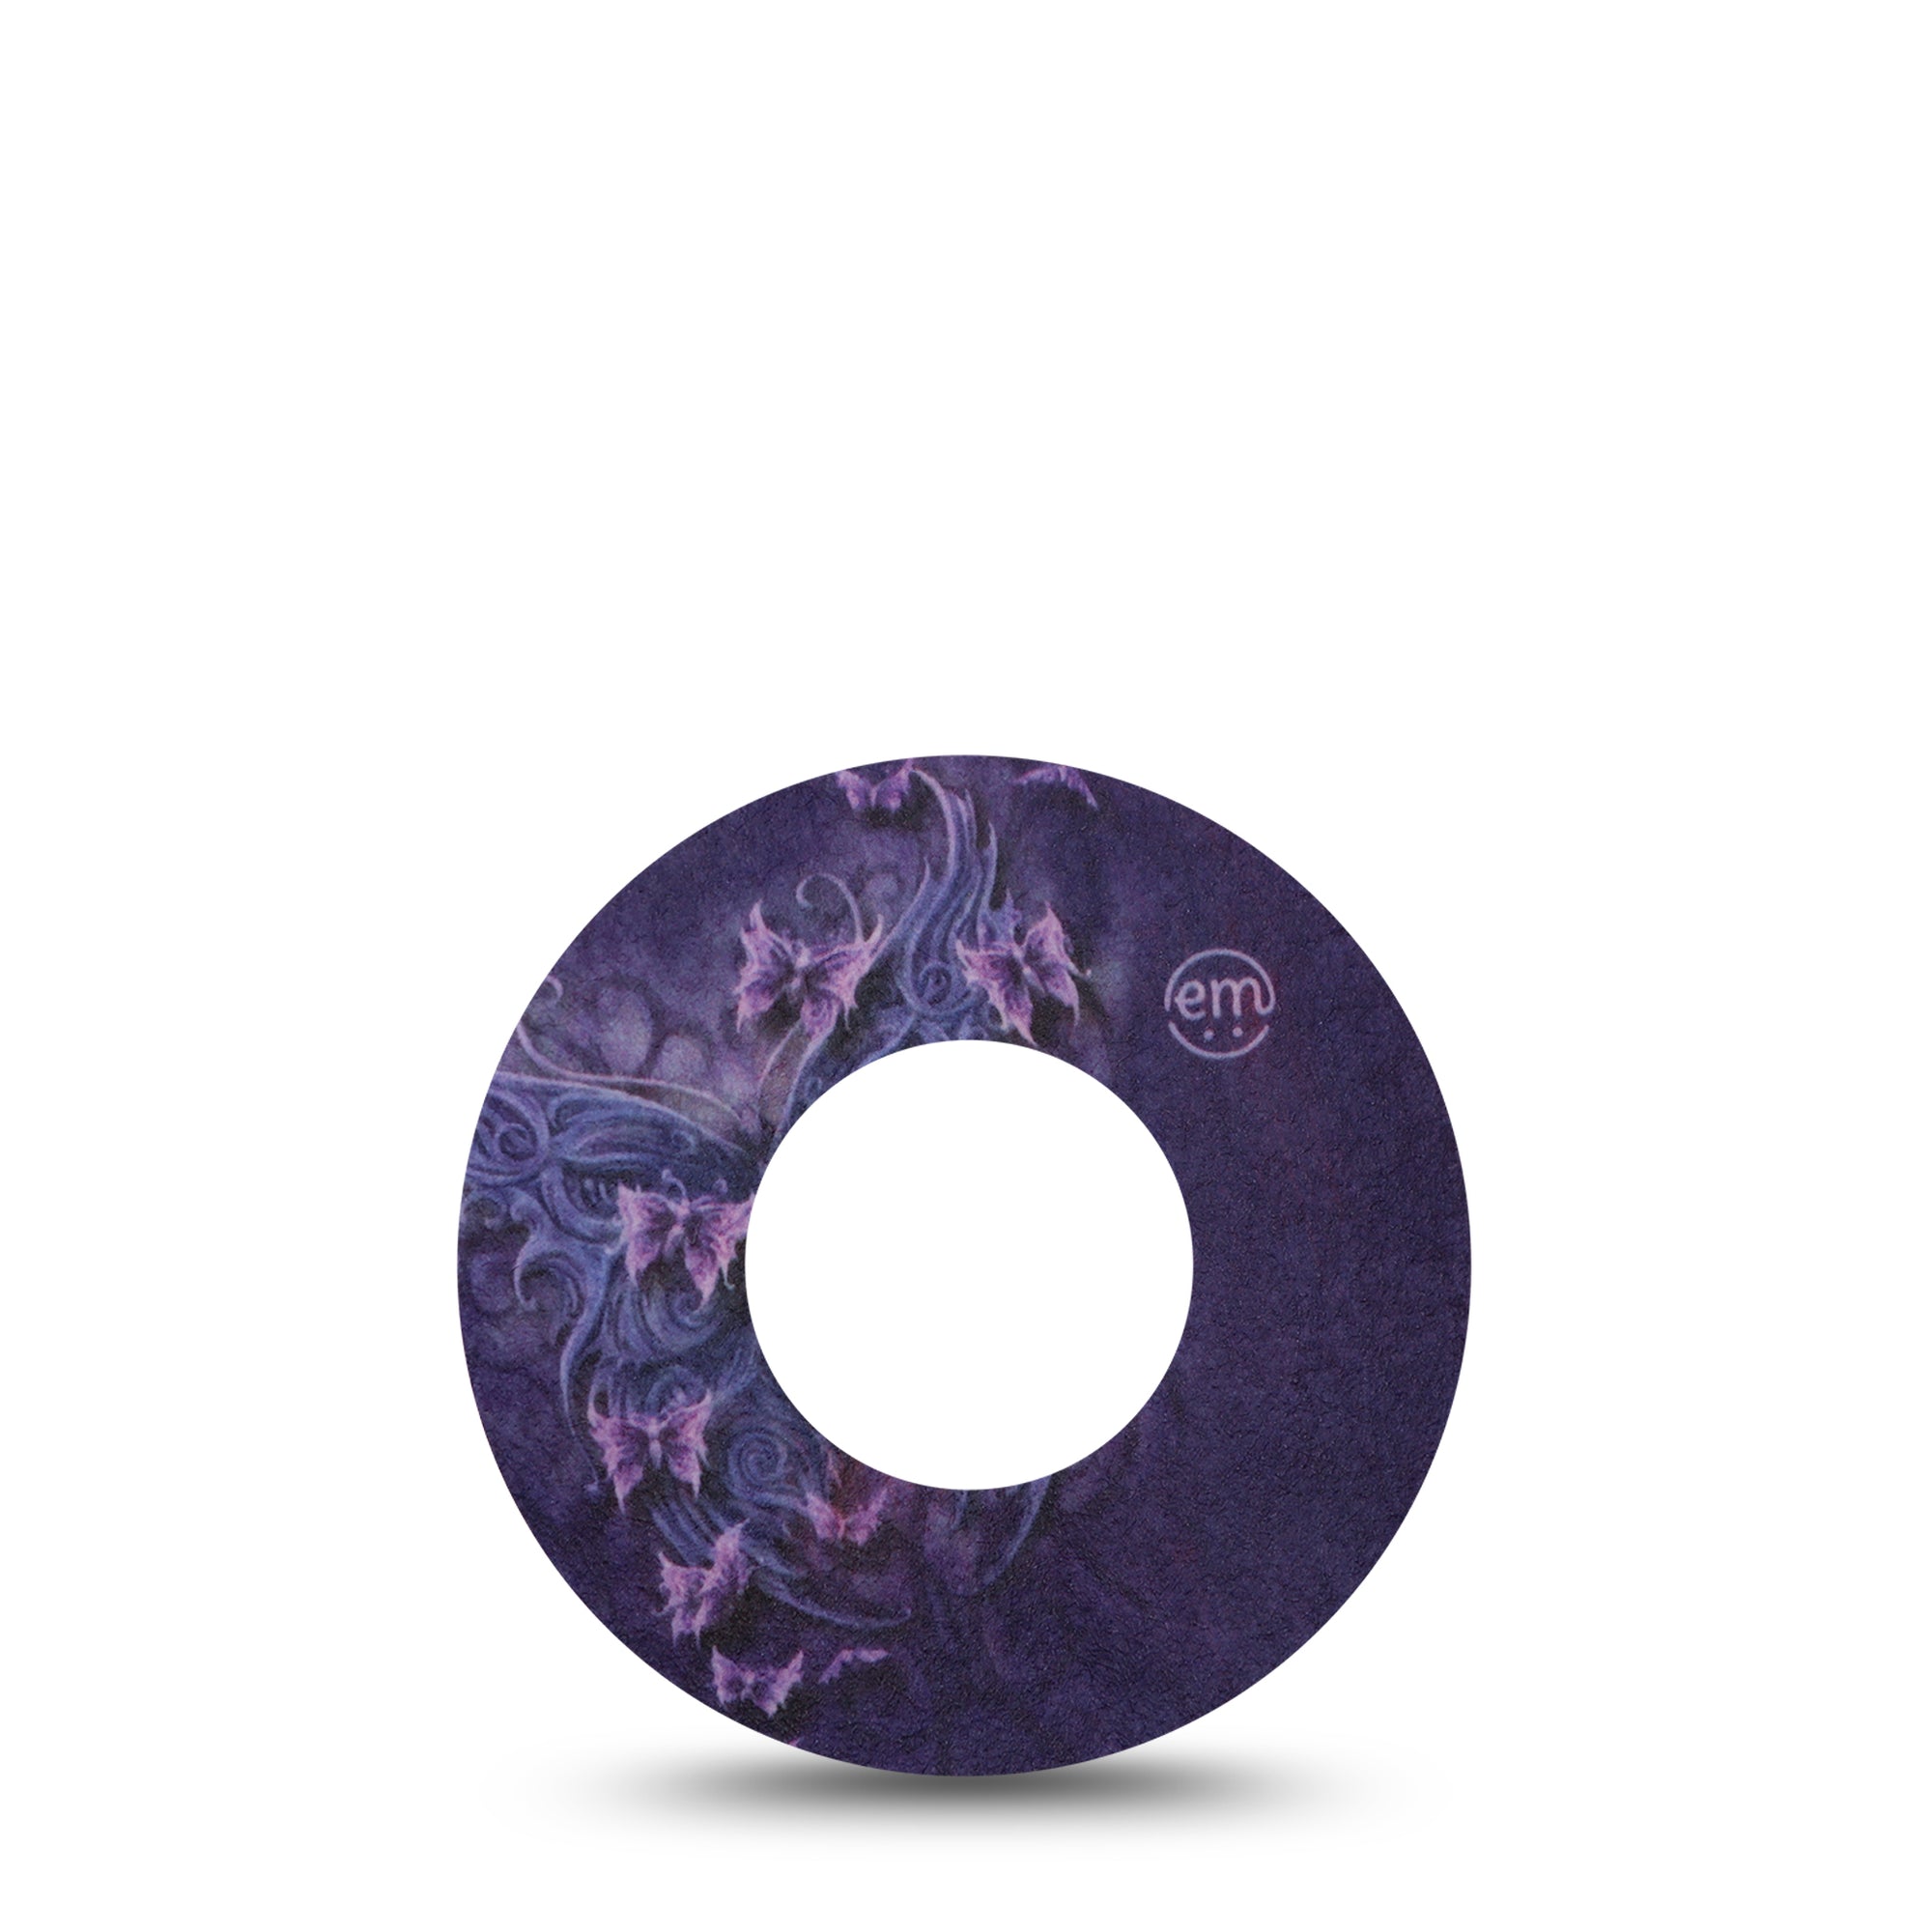 ExpressionMed Purple Butterfly Libre Tape